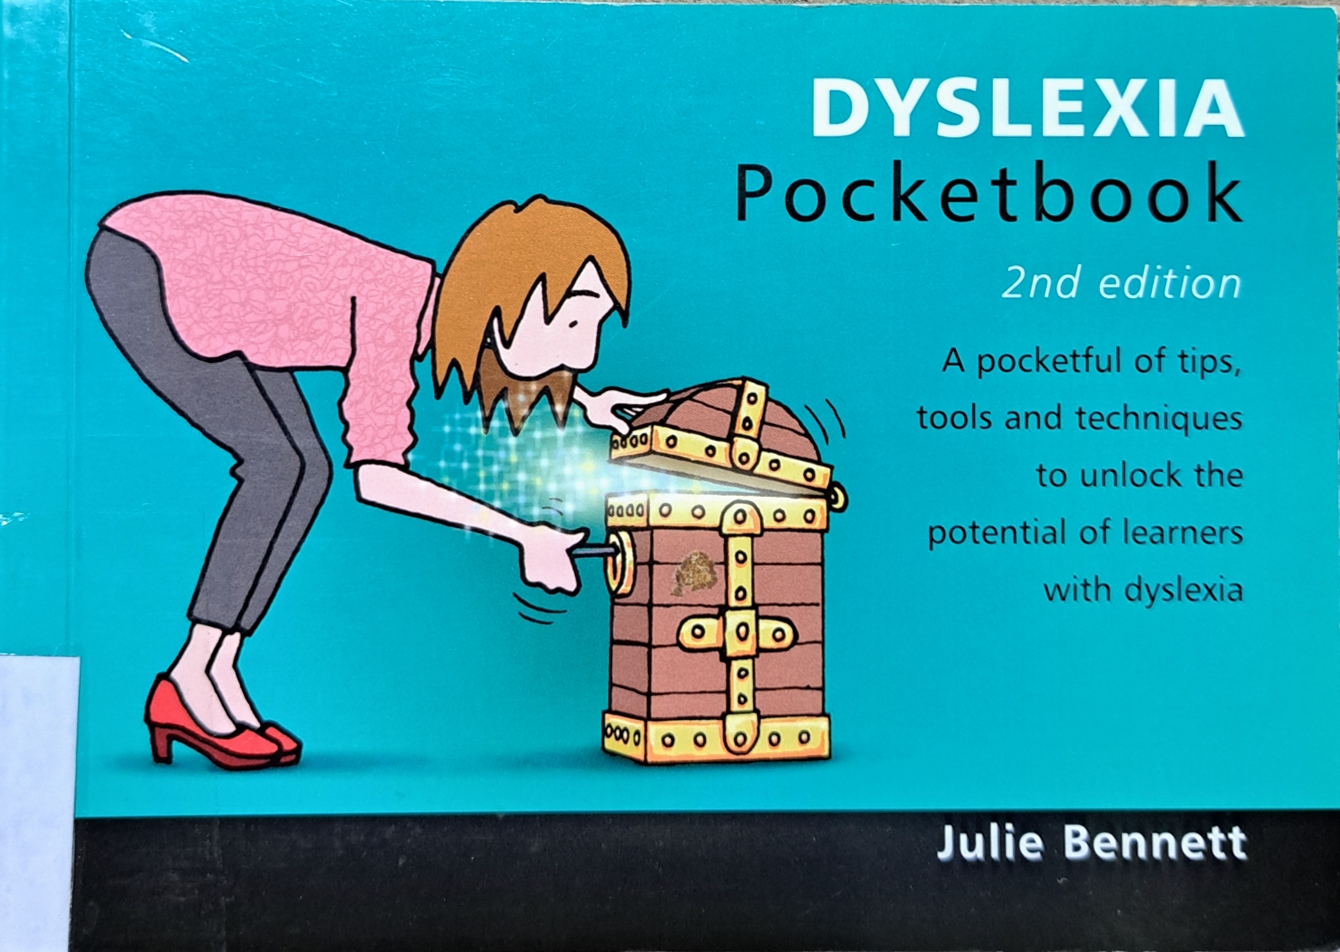 Cover image for Dyslexia pocketbook bibliographic